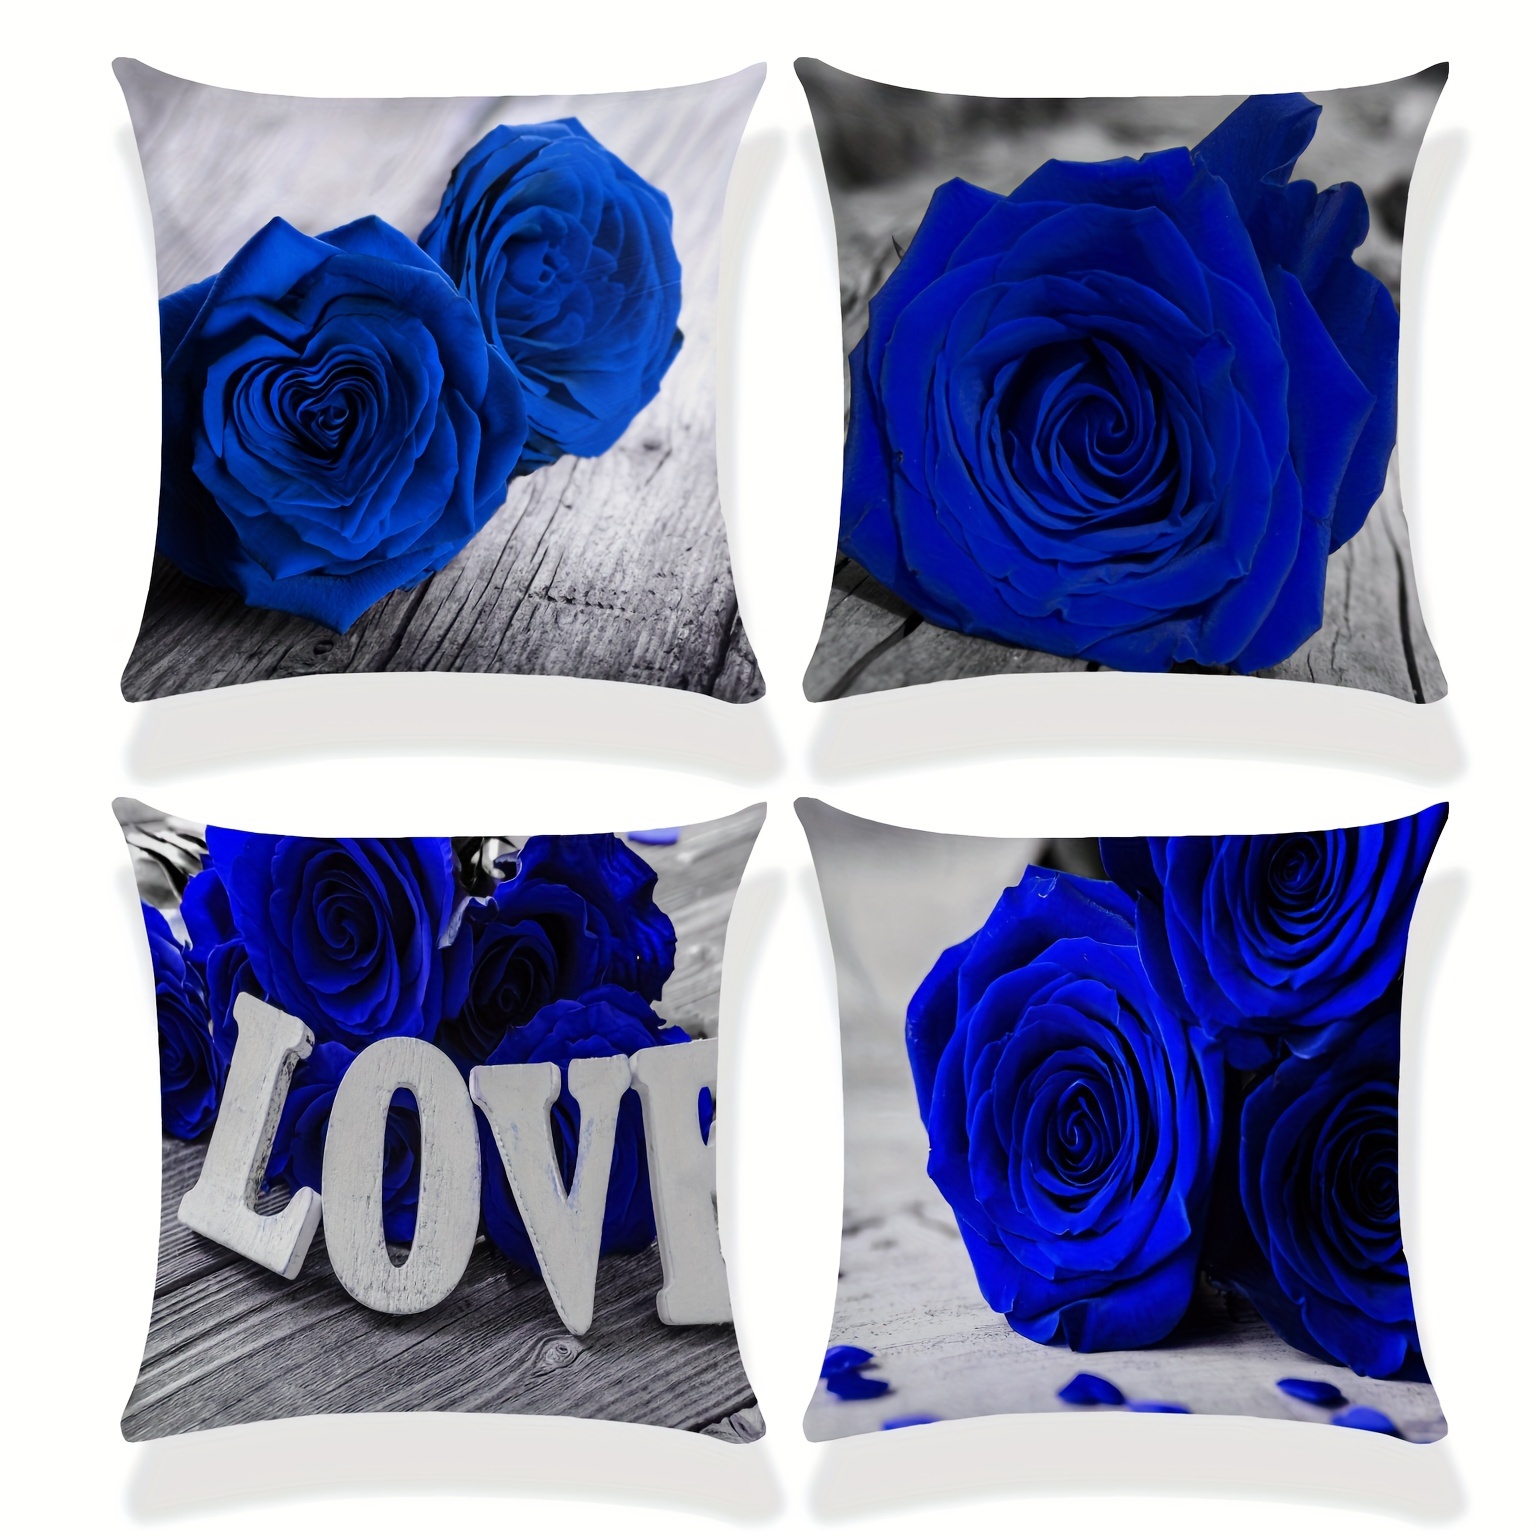 

4pcs Angel Blue Rose Love Print Throw Pillow Cover Happy Valentine's Day Decoration Cushion Case For Home Decor, Room Decor, Bedroom Decor, Living Room Decor, Sofa Decor (pillow Insert Not Included)